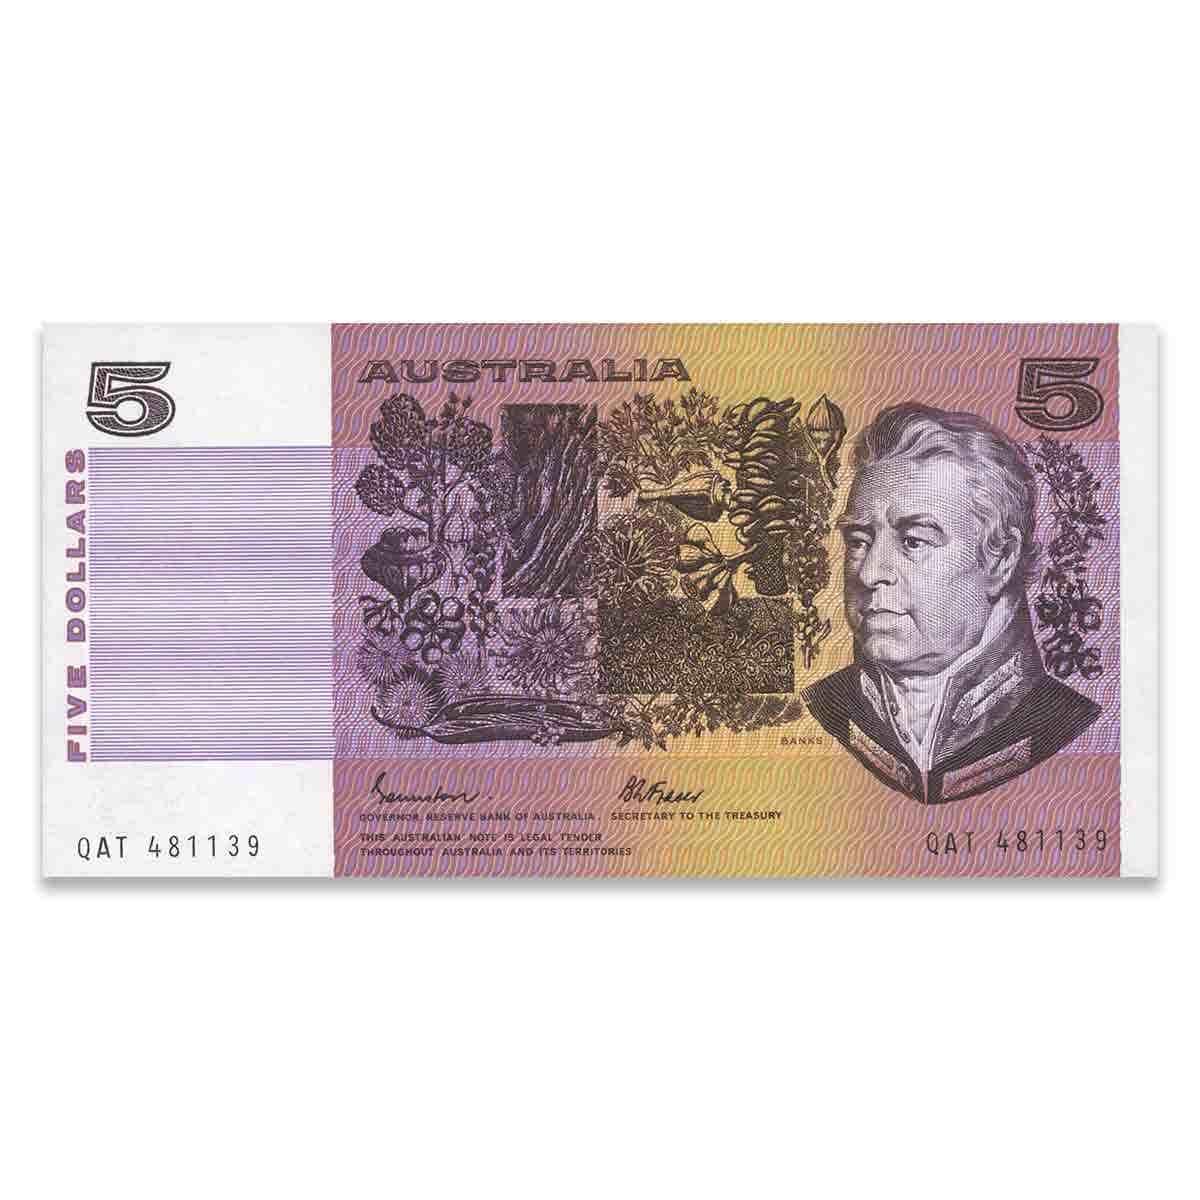 1985 $5 R209B Johnston/Fraser Gothic Banknote Uncirculated